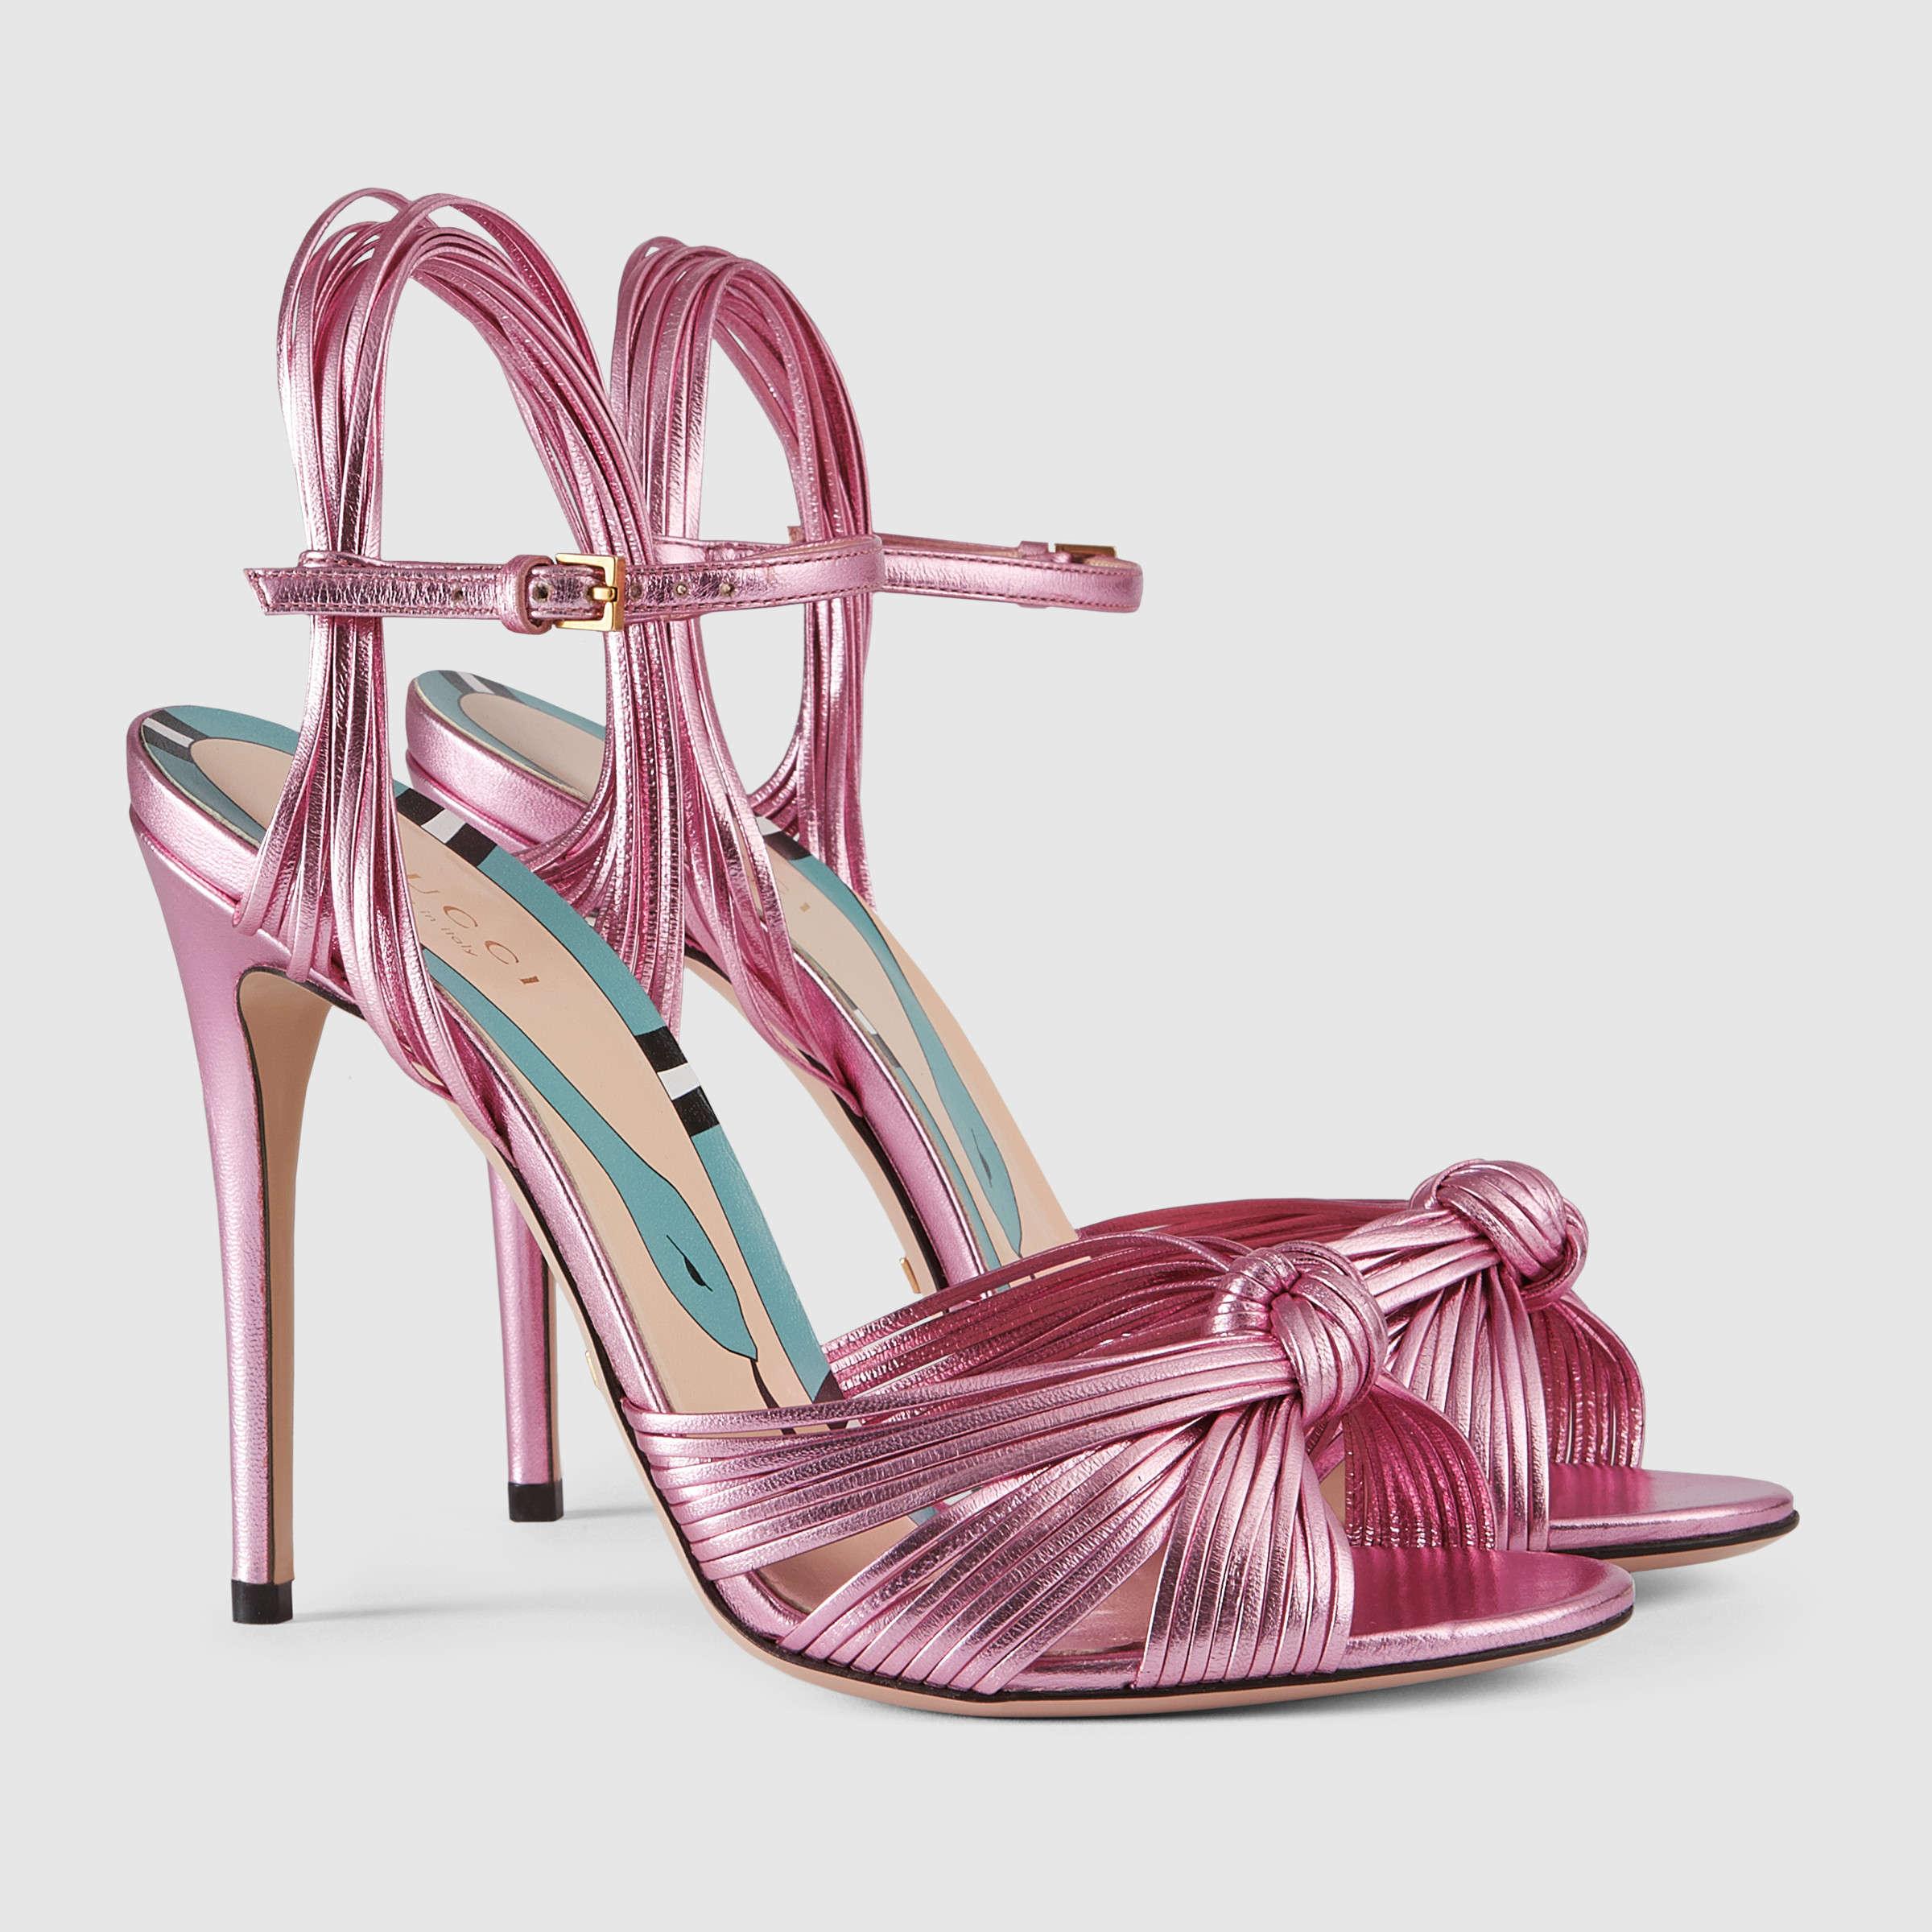 Gucci Allie Knotted Metallic Leather Sandals in Pink | Lyst